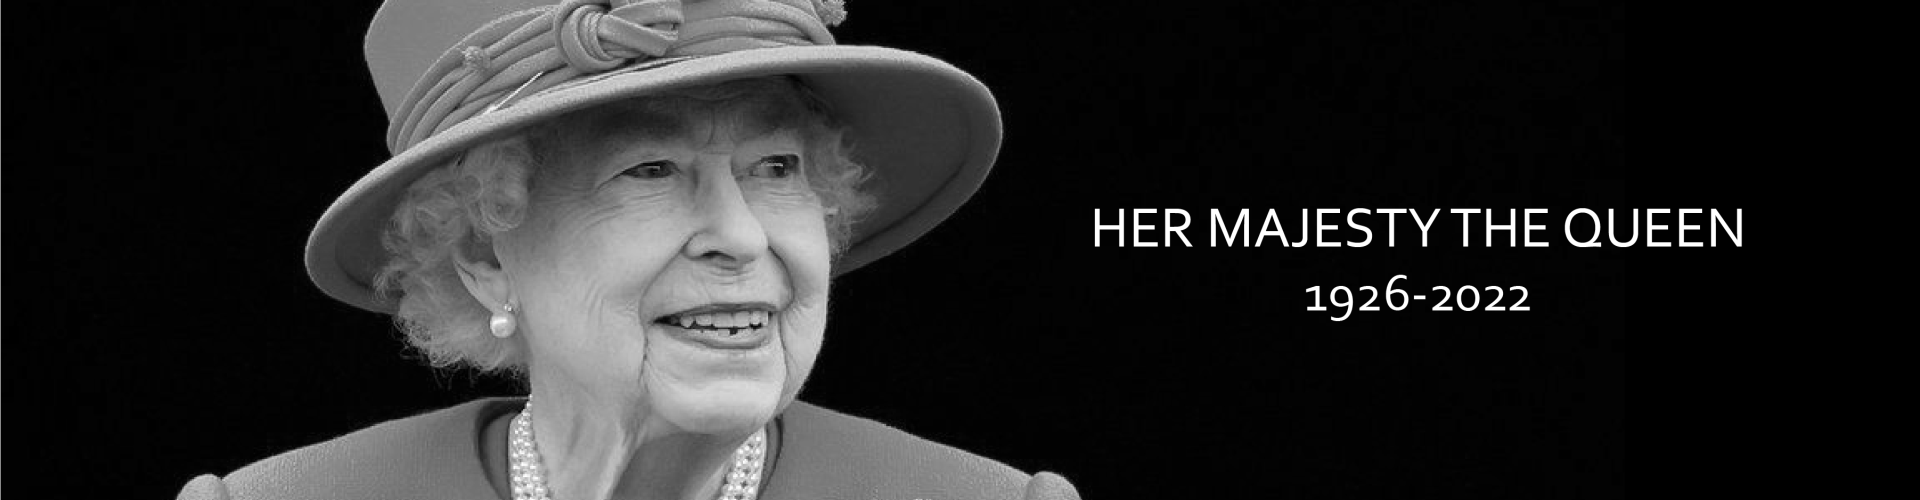 Her Majesty the Queen, Rest in Peace